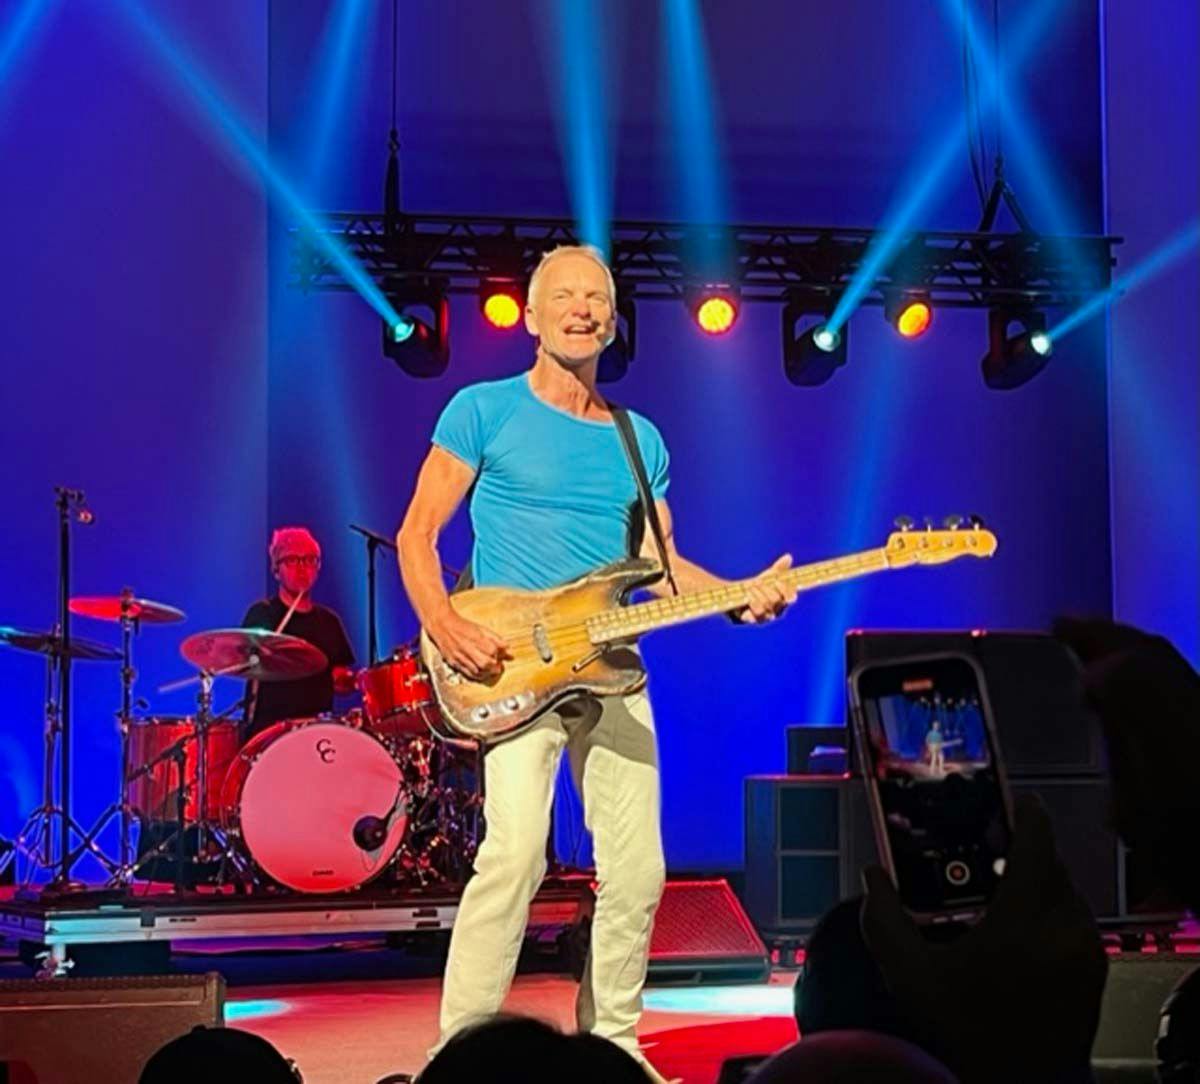 Sting performs at Dentsply Sirona World 2023 Friday night in Las Vegas. Image Credit: © Stan Goff